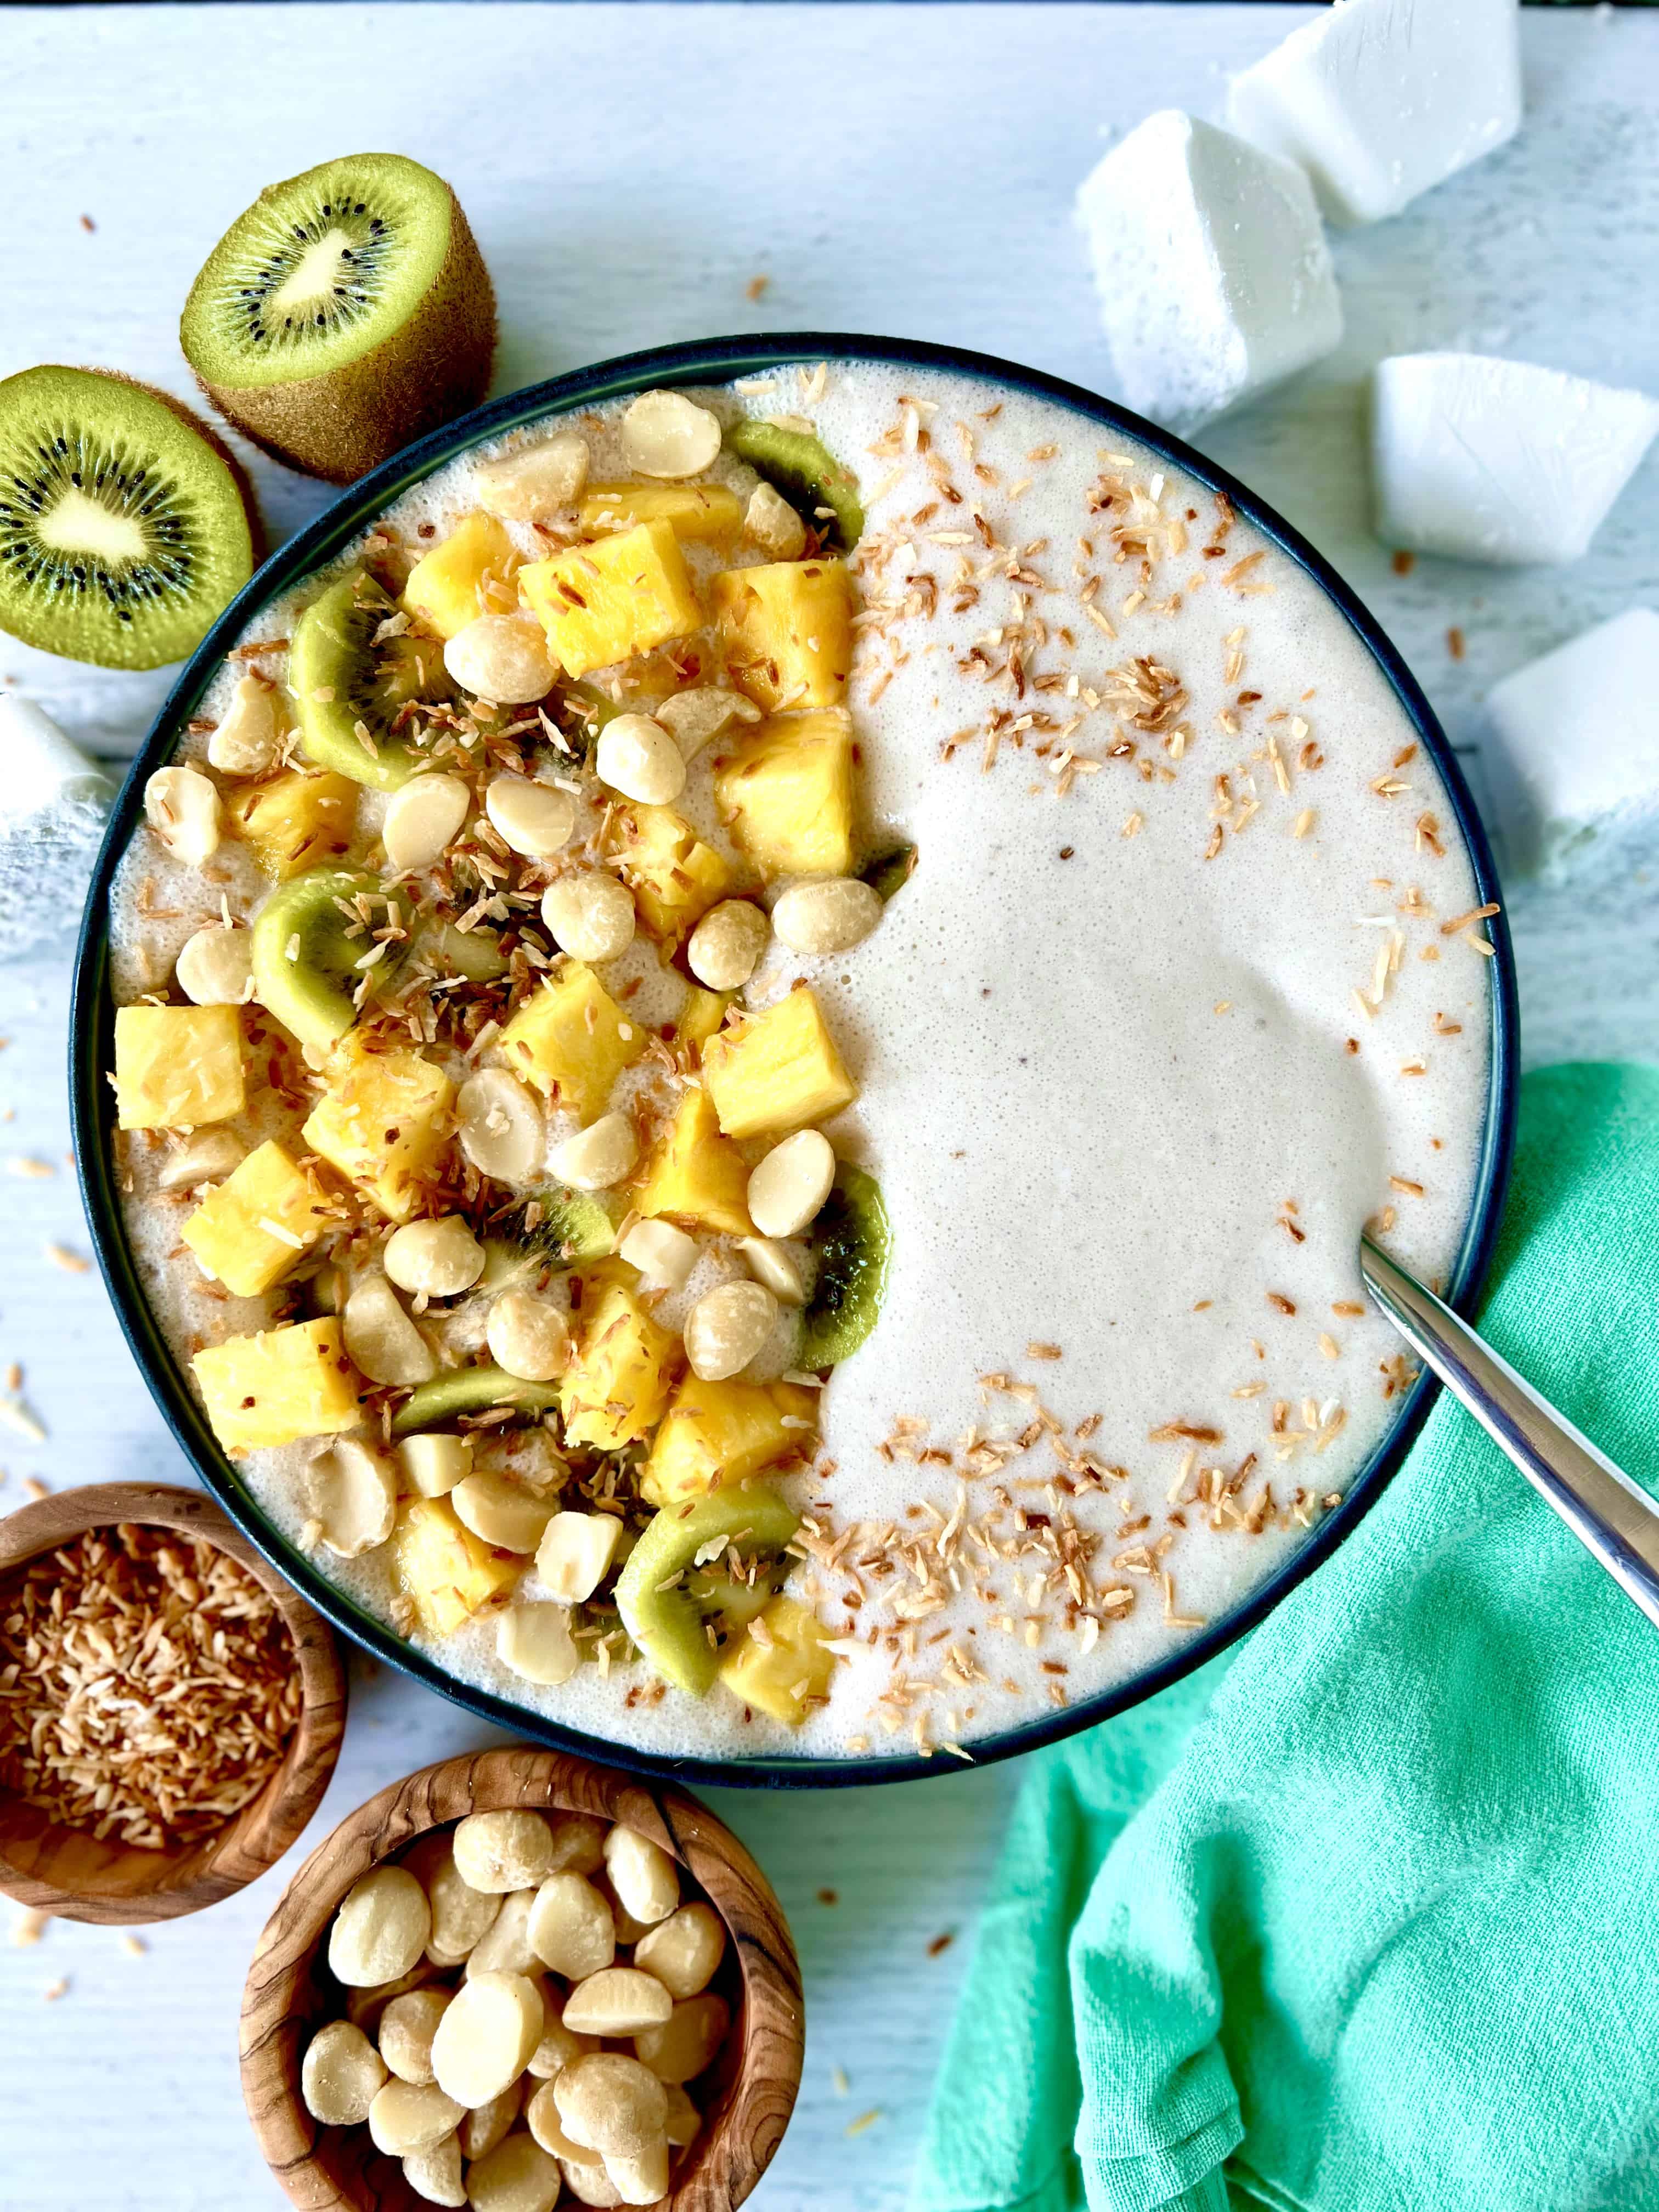 Paleo smoothie bowl made with frozen bananas, topped with pineapple, kiwi, macadamias and toasted shredded coconut, next to bowls of more macadamias and shredded coconut and a halved kiwi.